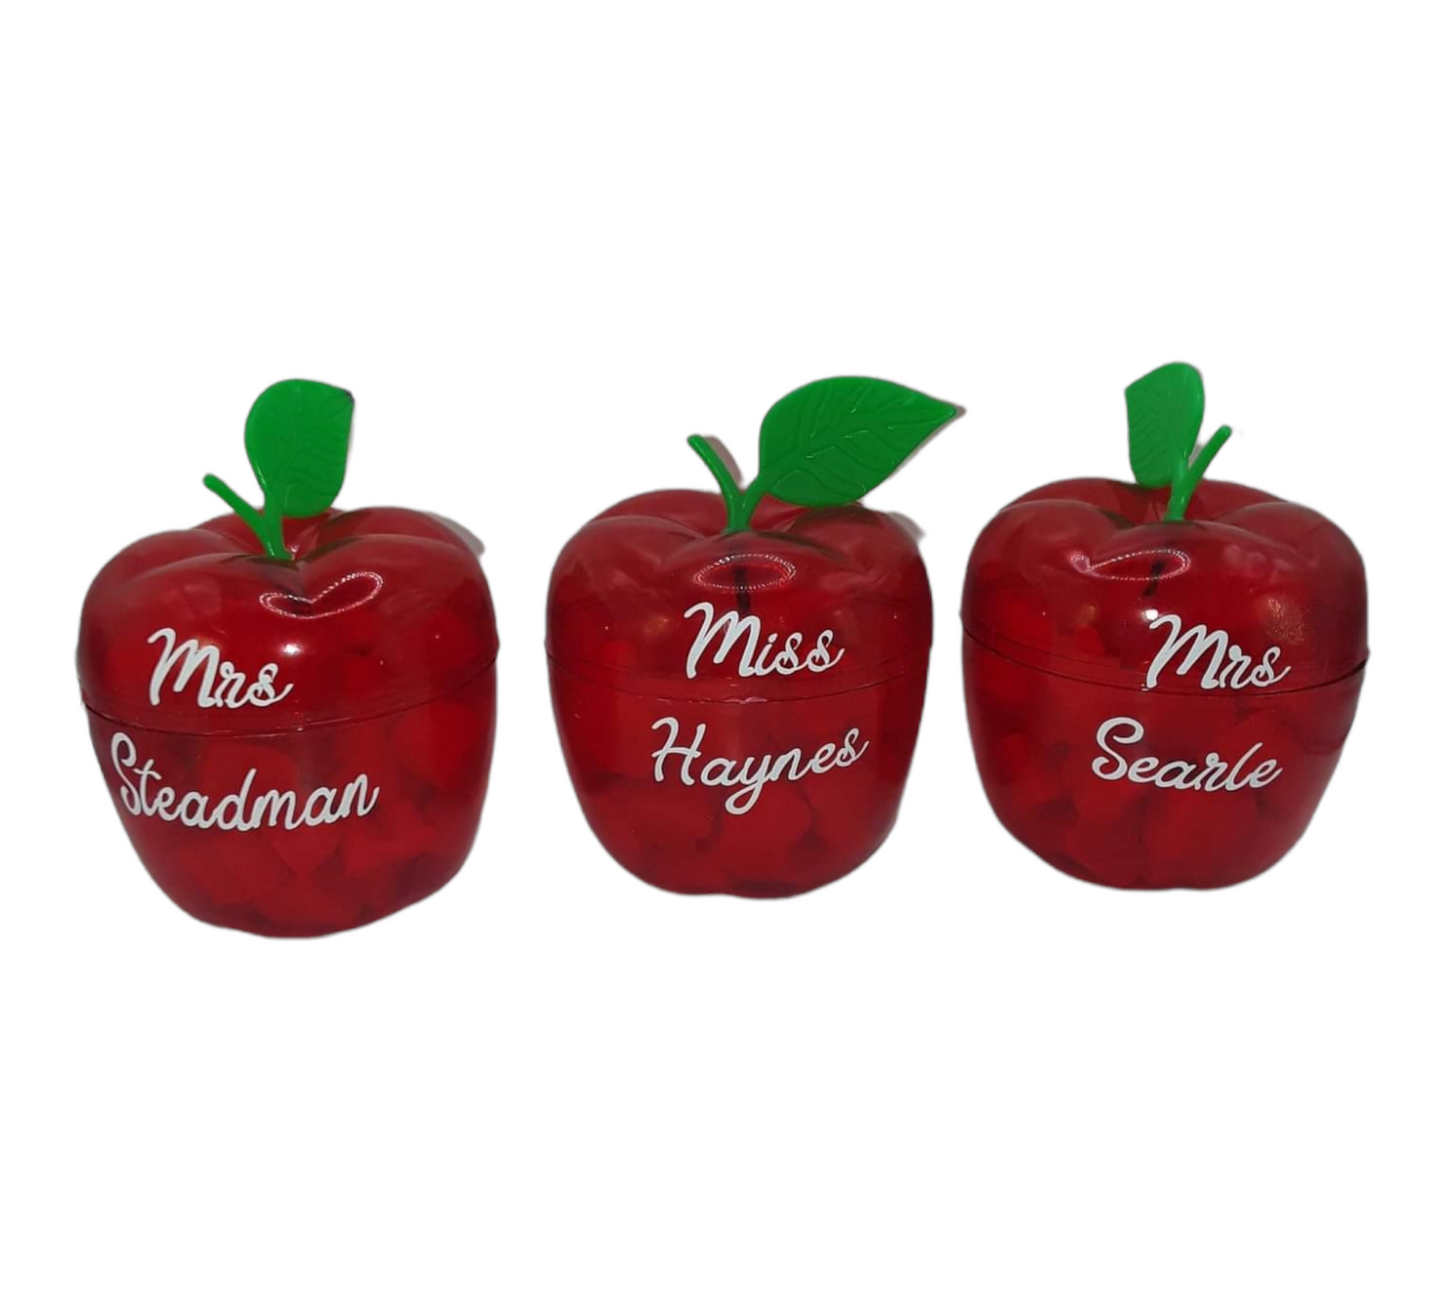 Personalised apple with wax melts